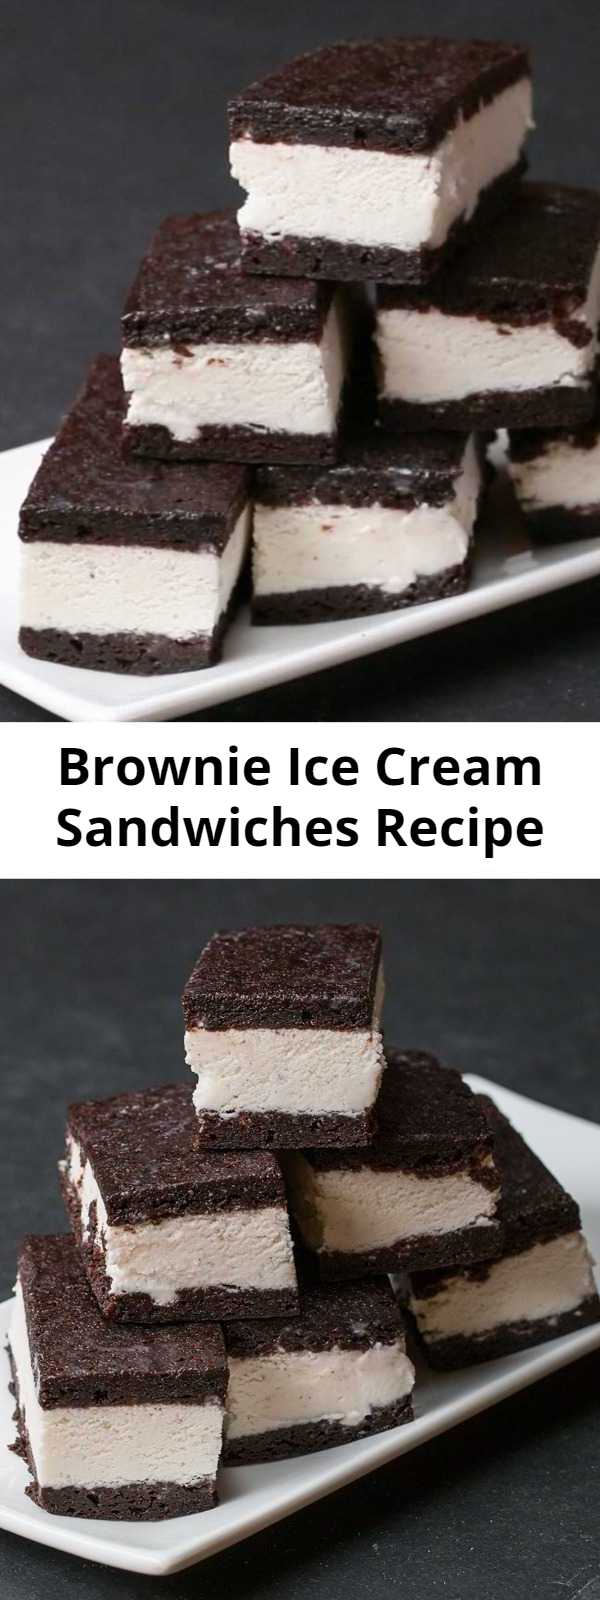 Brownie Ice Cream Sandwiches Recipe - Delicious brownie ice cream sandwiches that can be ready and waiting in the freezer.